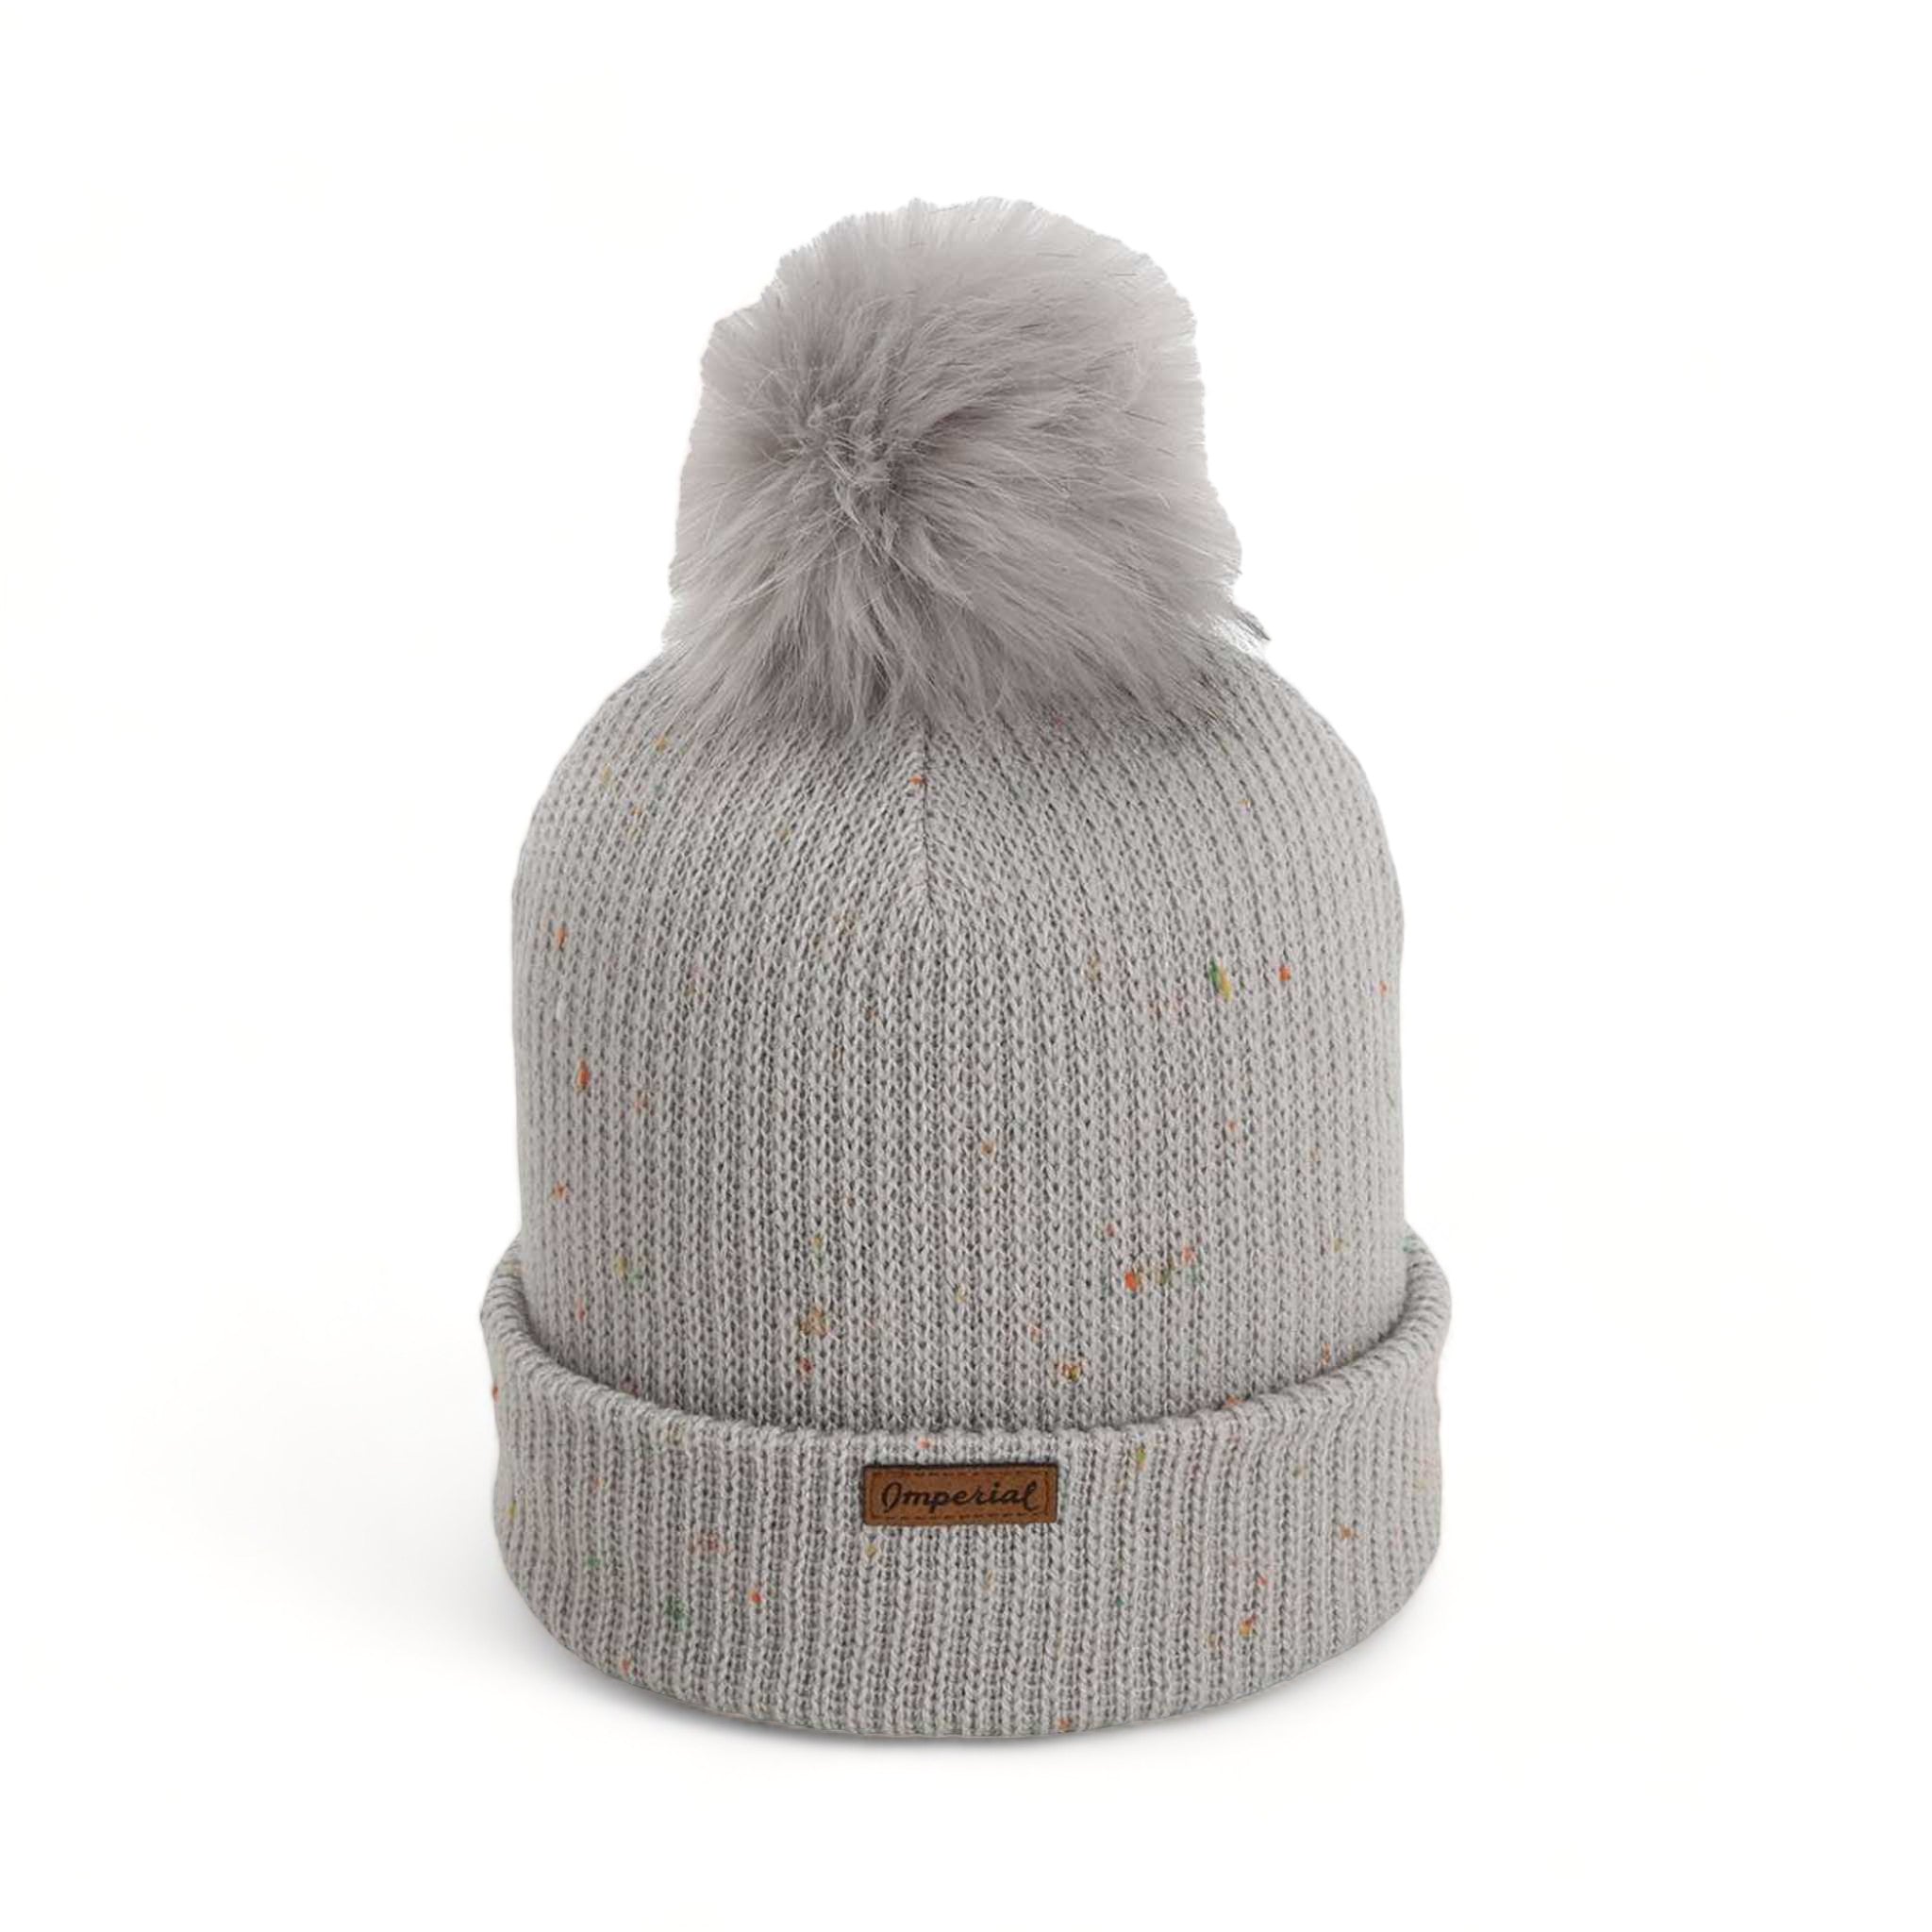 Side view of Imperial 6014 custom hat in light grey